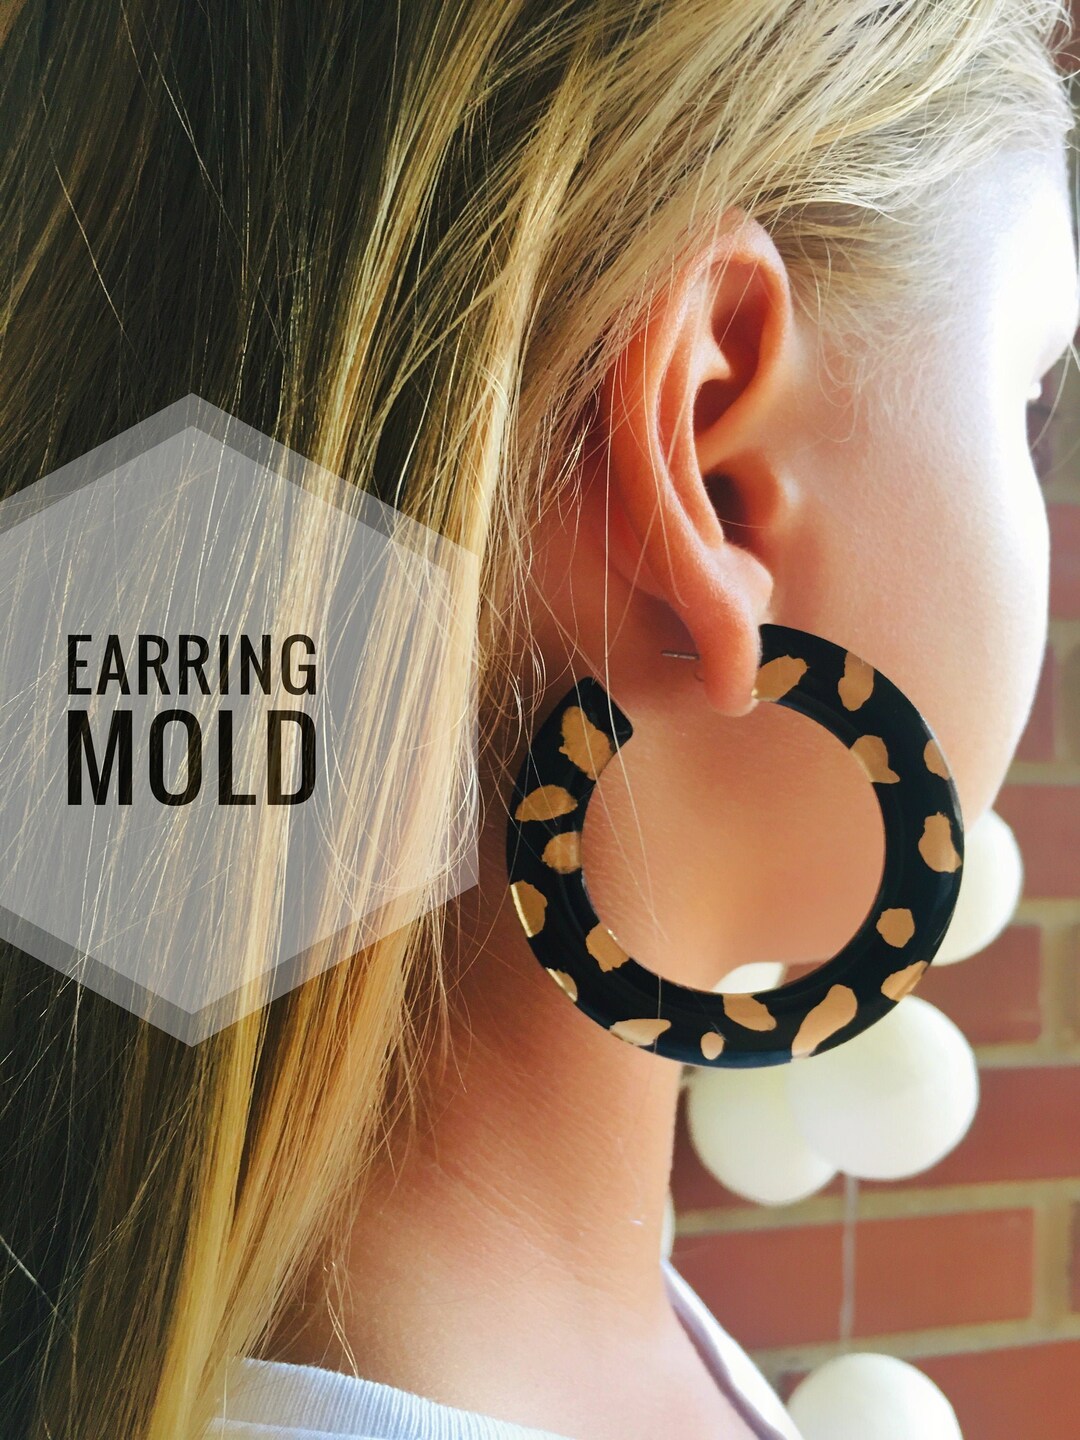 Mold for UV Resin. Women Face Earrings Mold XL. Silicone Mold for